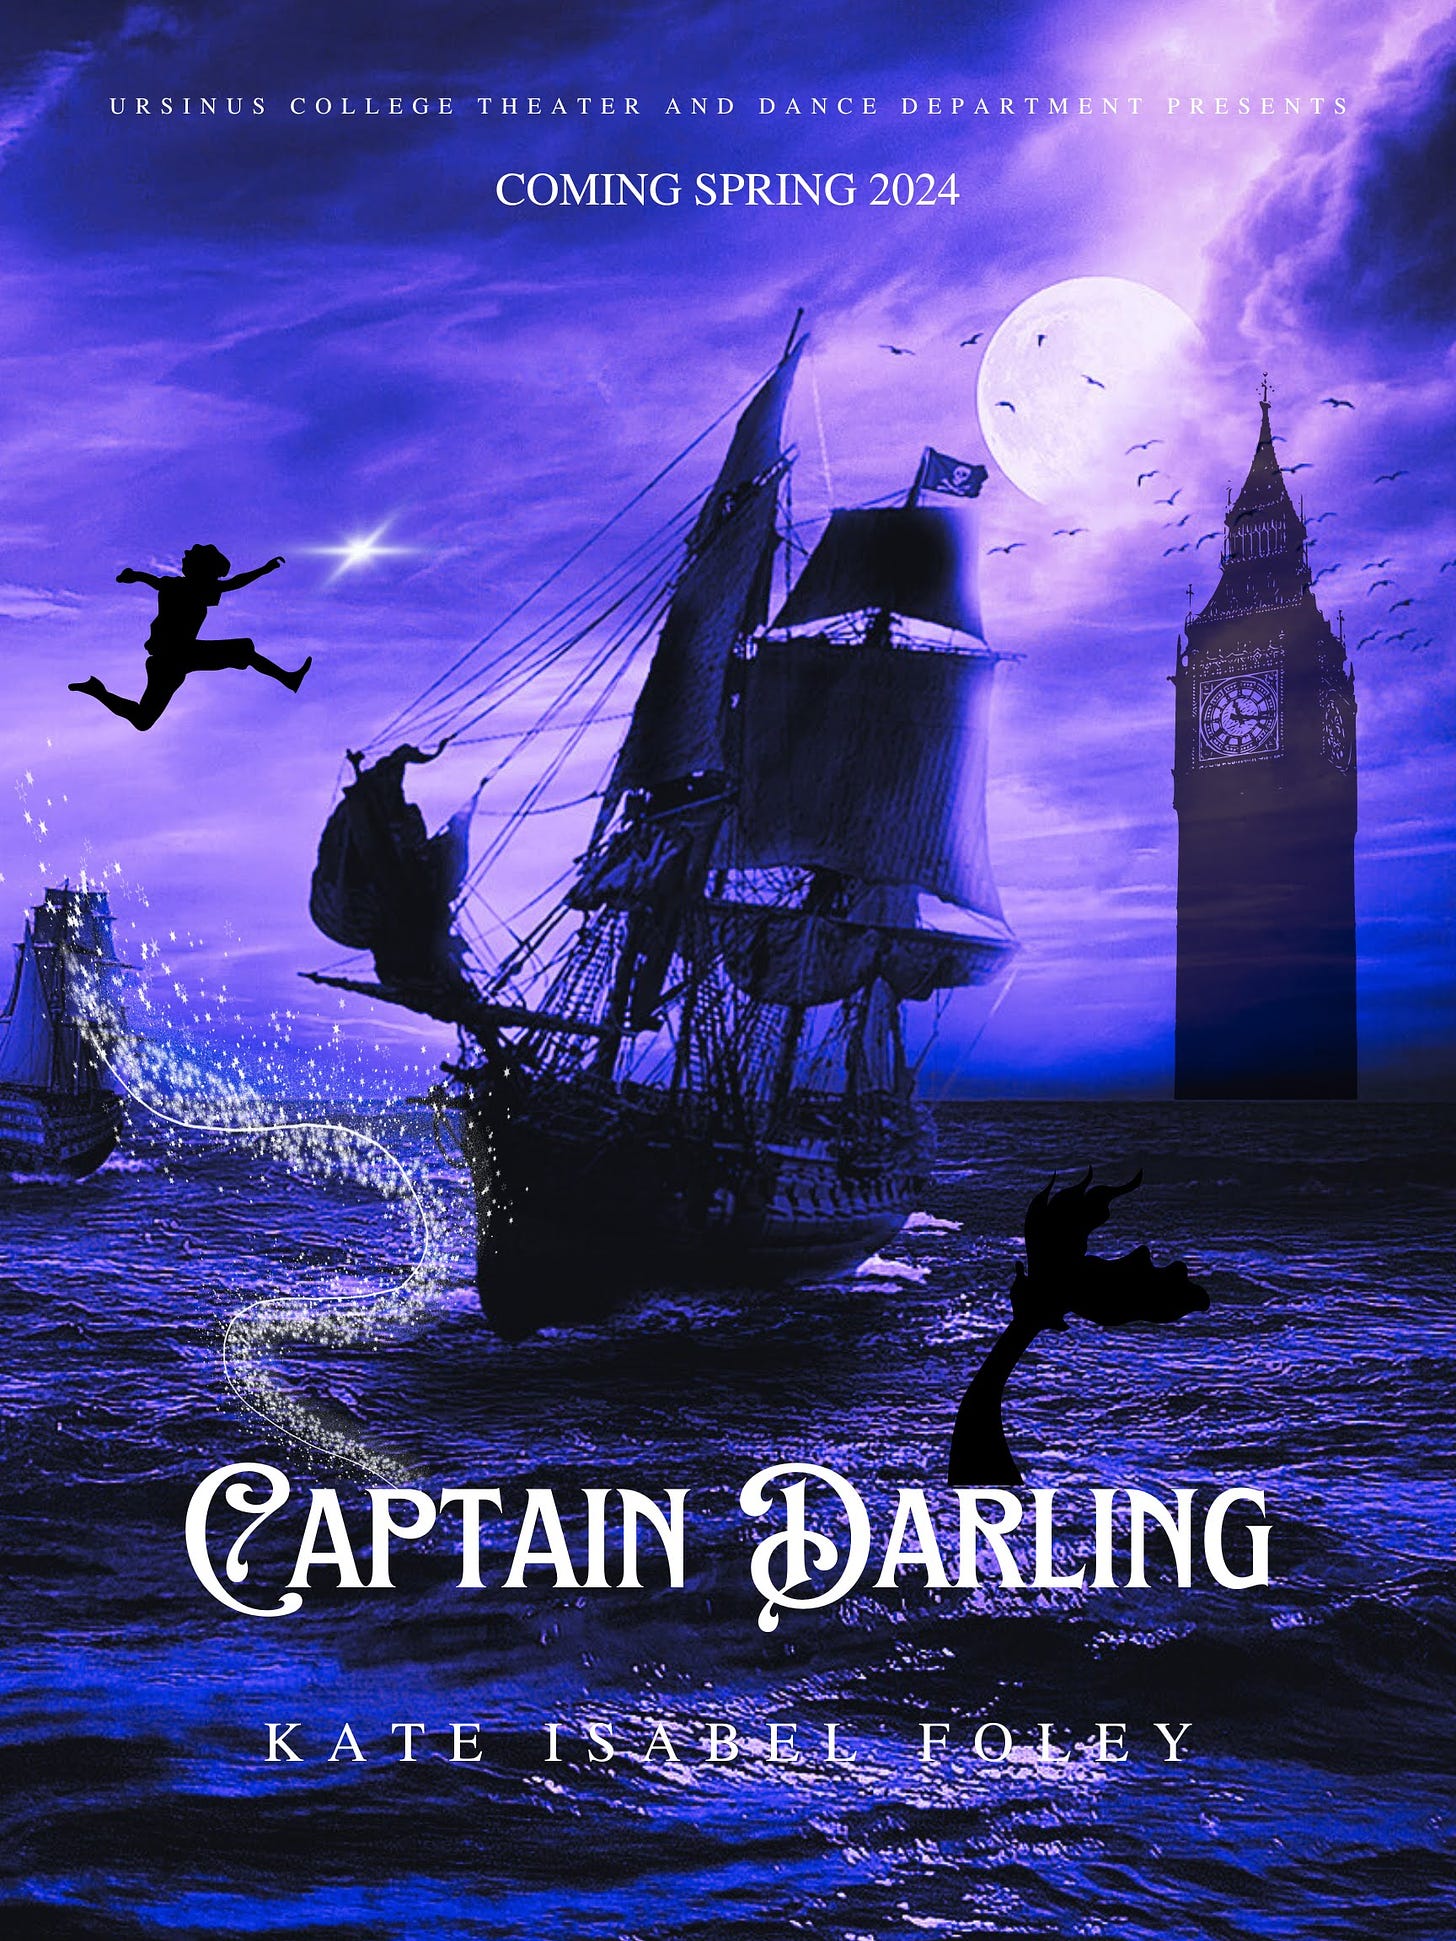 A poster for Captain Darling